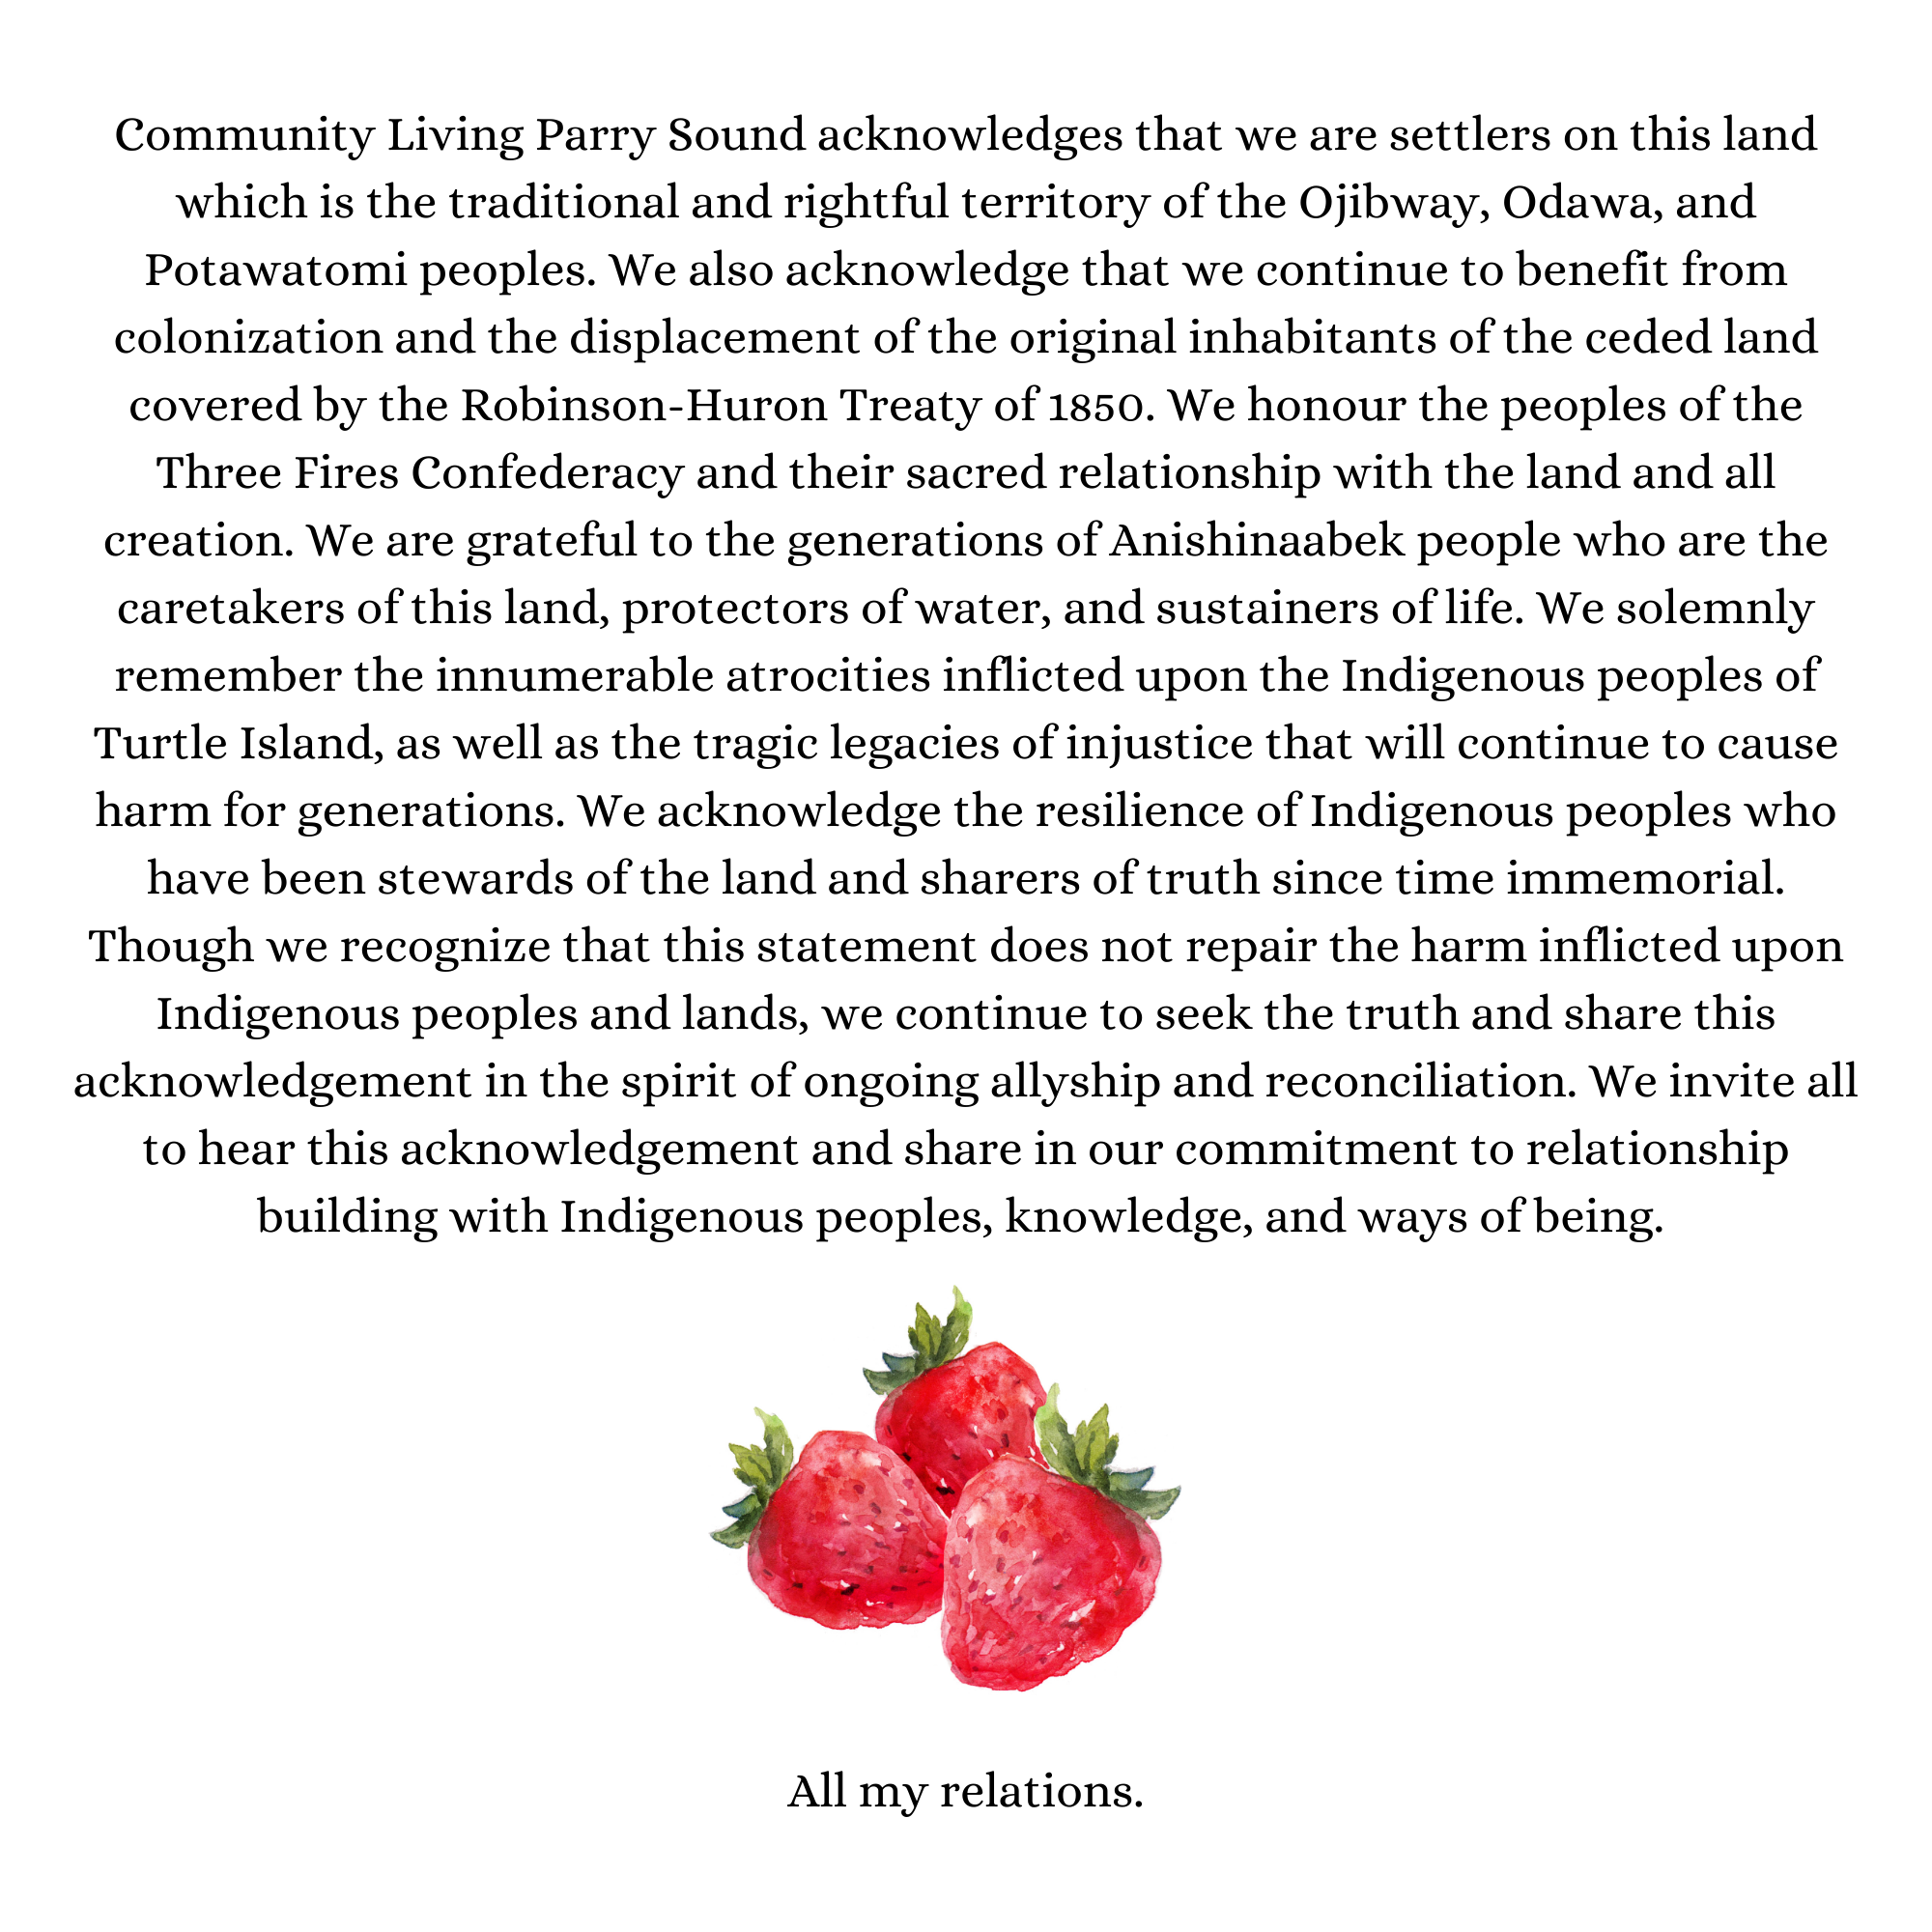 Community Living Parry Sound acknowledges that we are settlers on this land which is the traditional and rightful territory of the Ojibway, Odawa, and Potawatomi peoples. We also acknowledge that we continue to benefit from colonization and the displacement of the original inhabitants of the ceded land covered by the Robinson-Huron Treaty of 1850. We honour the peoples of the Three Fires Confederacy and their sacred relationship with the land and all creation. We are grateful to the generations of Anishinaabek people who are the caretakers of this land, protectors of water, and sustainers of life. We solemnly remember the innumerable atrocities inflicted upon the Indigenous peoples of Turtle Island, as well as the tragic legacies of injustice that will continue to cause harm for generations. We acknowledge the resilience of Indigenous peoples who have been stewards of the land and sharers of truth since time immemorial. Though we recognize that this statement does not repair the harm inflicted upon Indigenous peoples and lands, we continue to seek the truth and share this acknowledgement in the spirit of ongoing allyship and reconciliation. We invite all to hear this acknowledgement and share in our commitment to relationship building with Indigenous peoples, knowledge, and ways of being. 